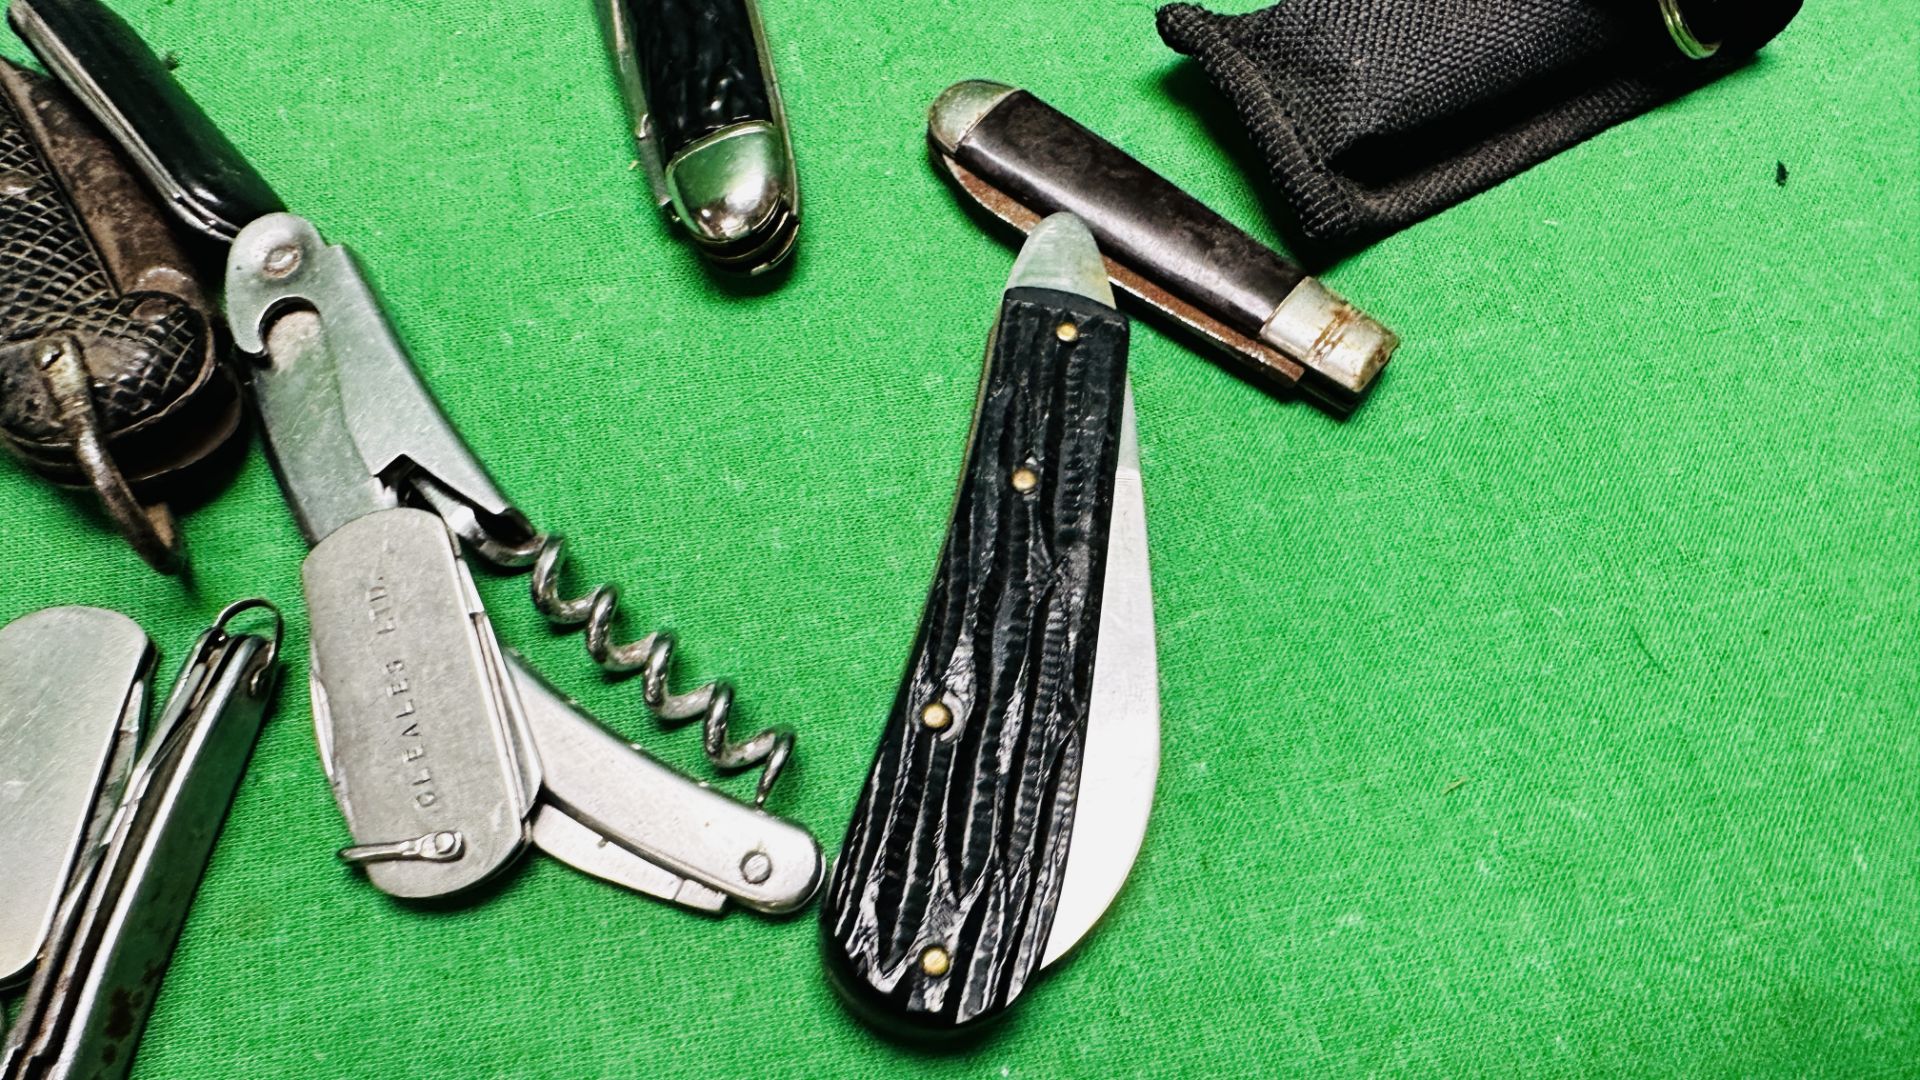 GROUP OF 15 VINTAGE AND MODERN POCKET KNIVES AND MULTI TOOLS INCLUDING RICHARDS, NEW HOLLAND, CK, J. - Image 3 of 7